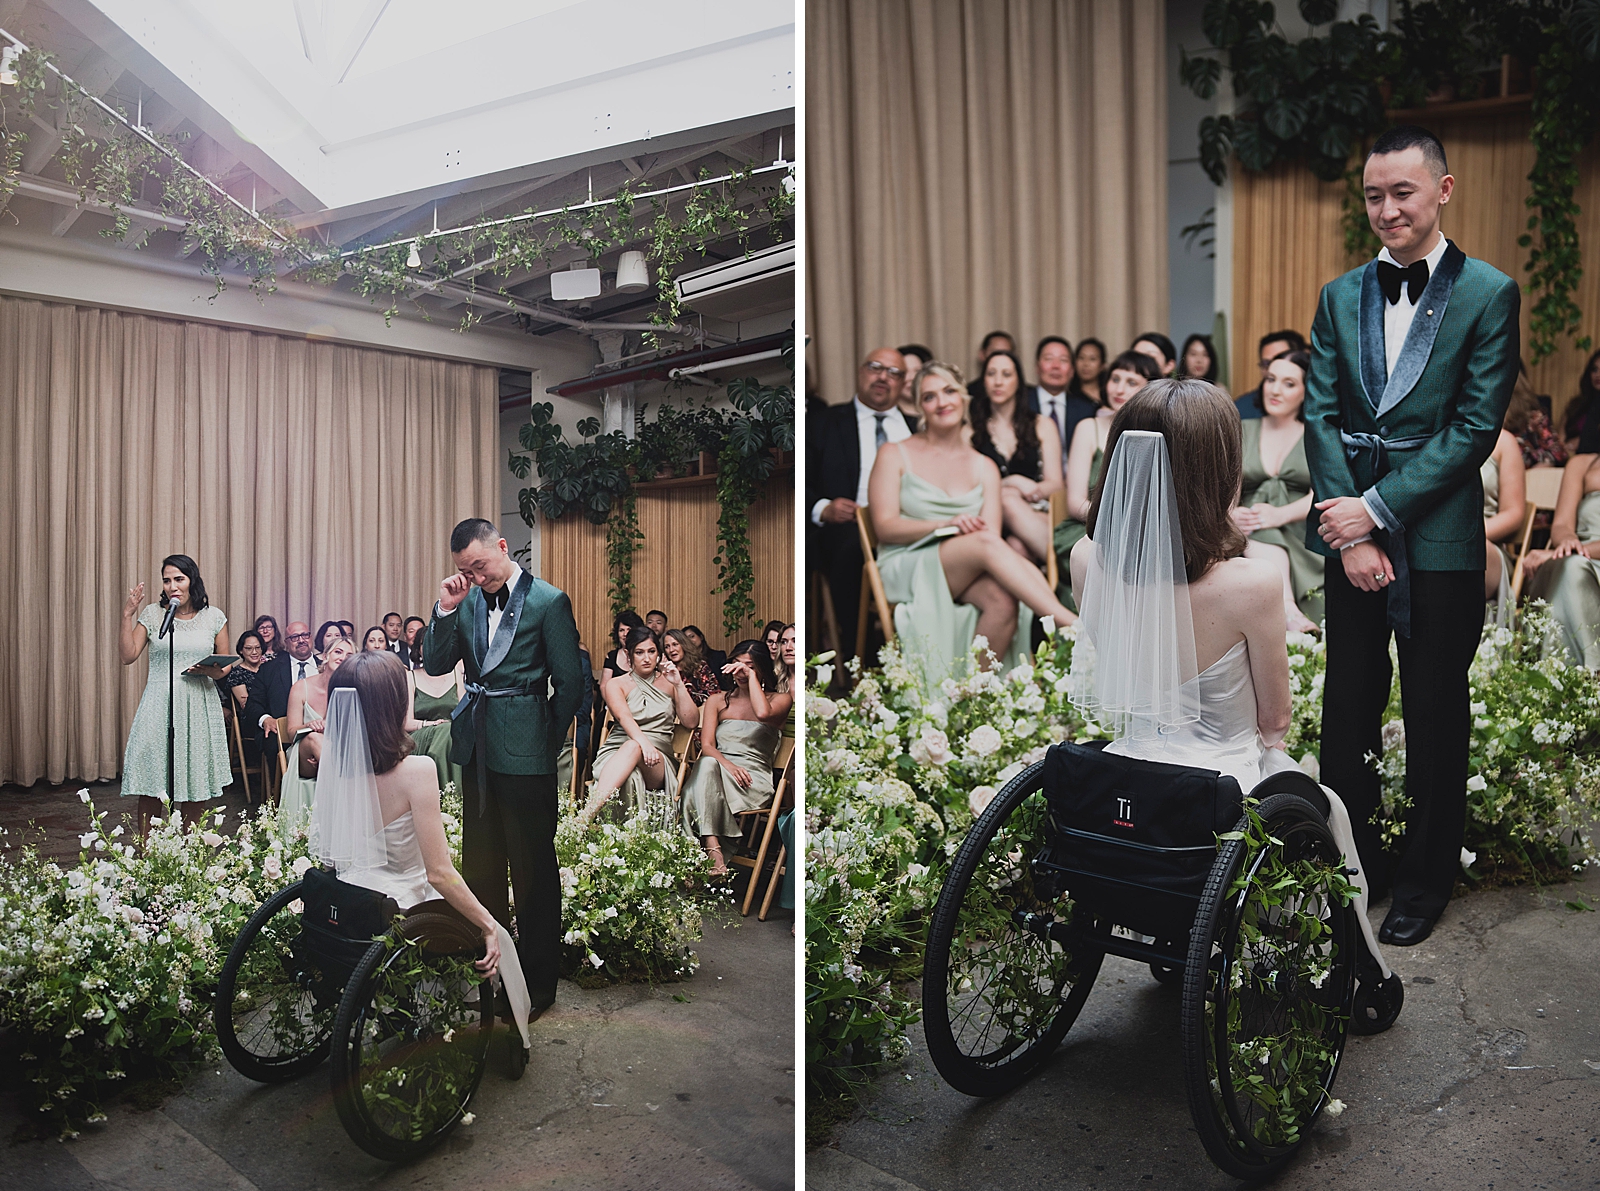 Left photo: Shot of the bride and groom at the altar as their officiant speaks.
Right photo: Shot of the groom smiling at the bride.